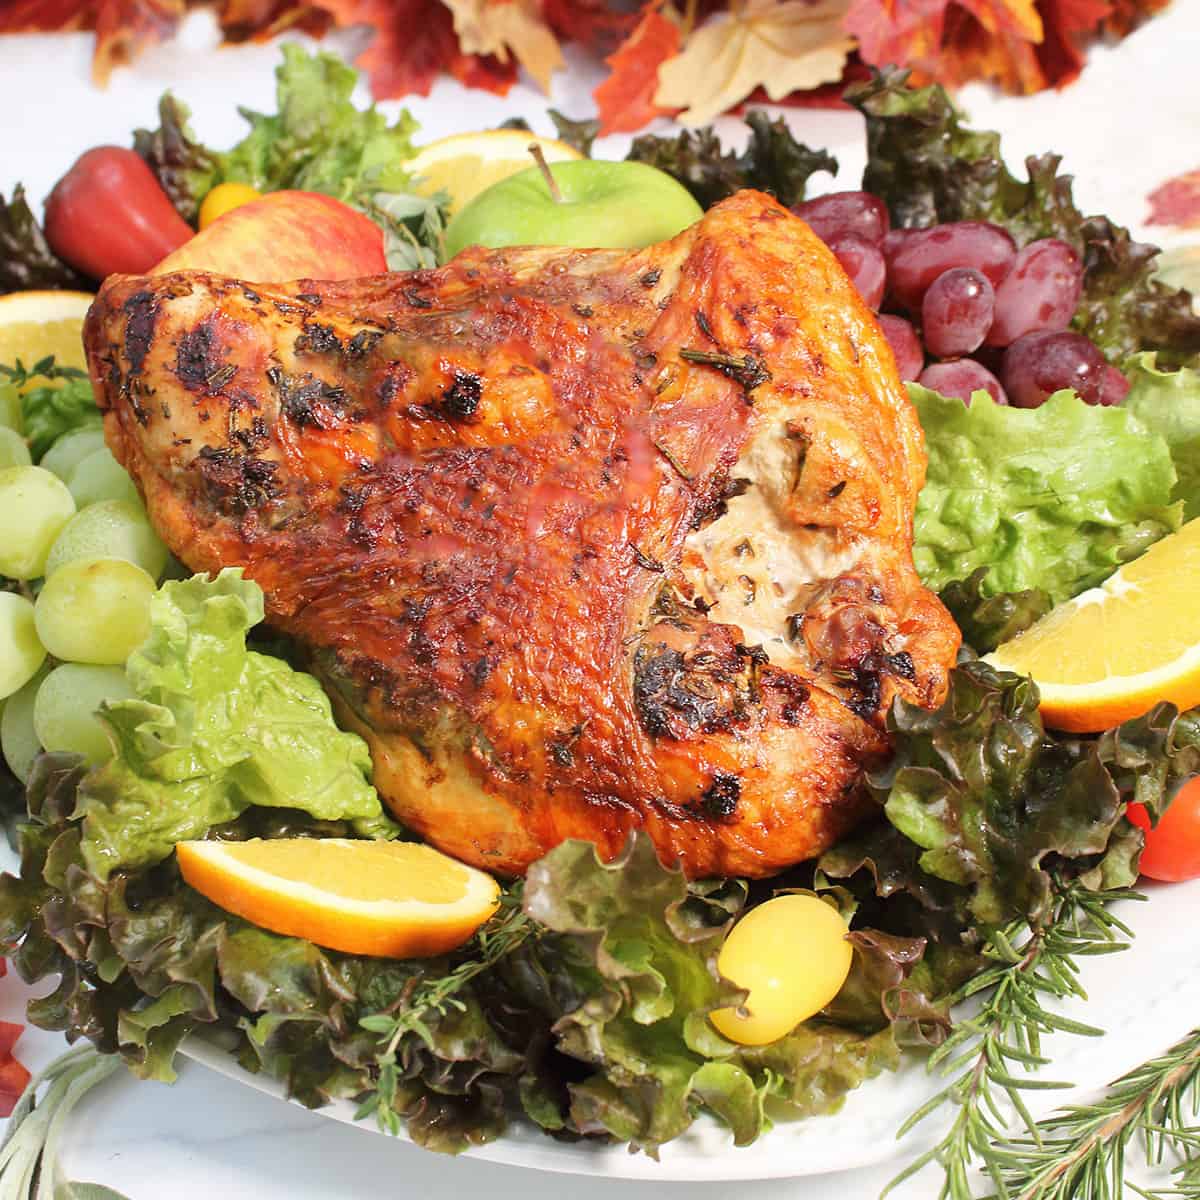 https://2cookinmamas.com/wp-content/uploads/2021/11/Air-Fryer-Turkey-Breast-on-decorated-platter-square-1.jpg